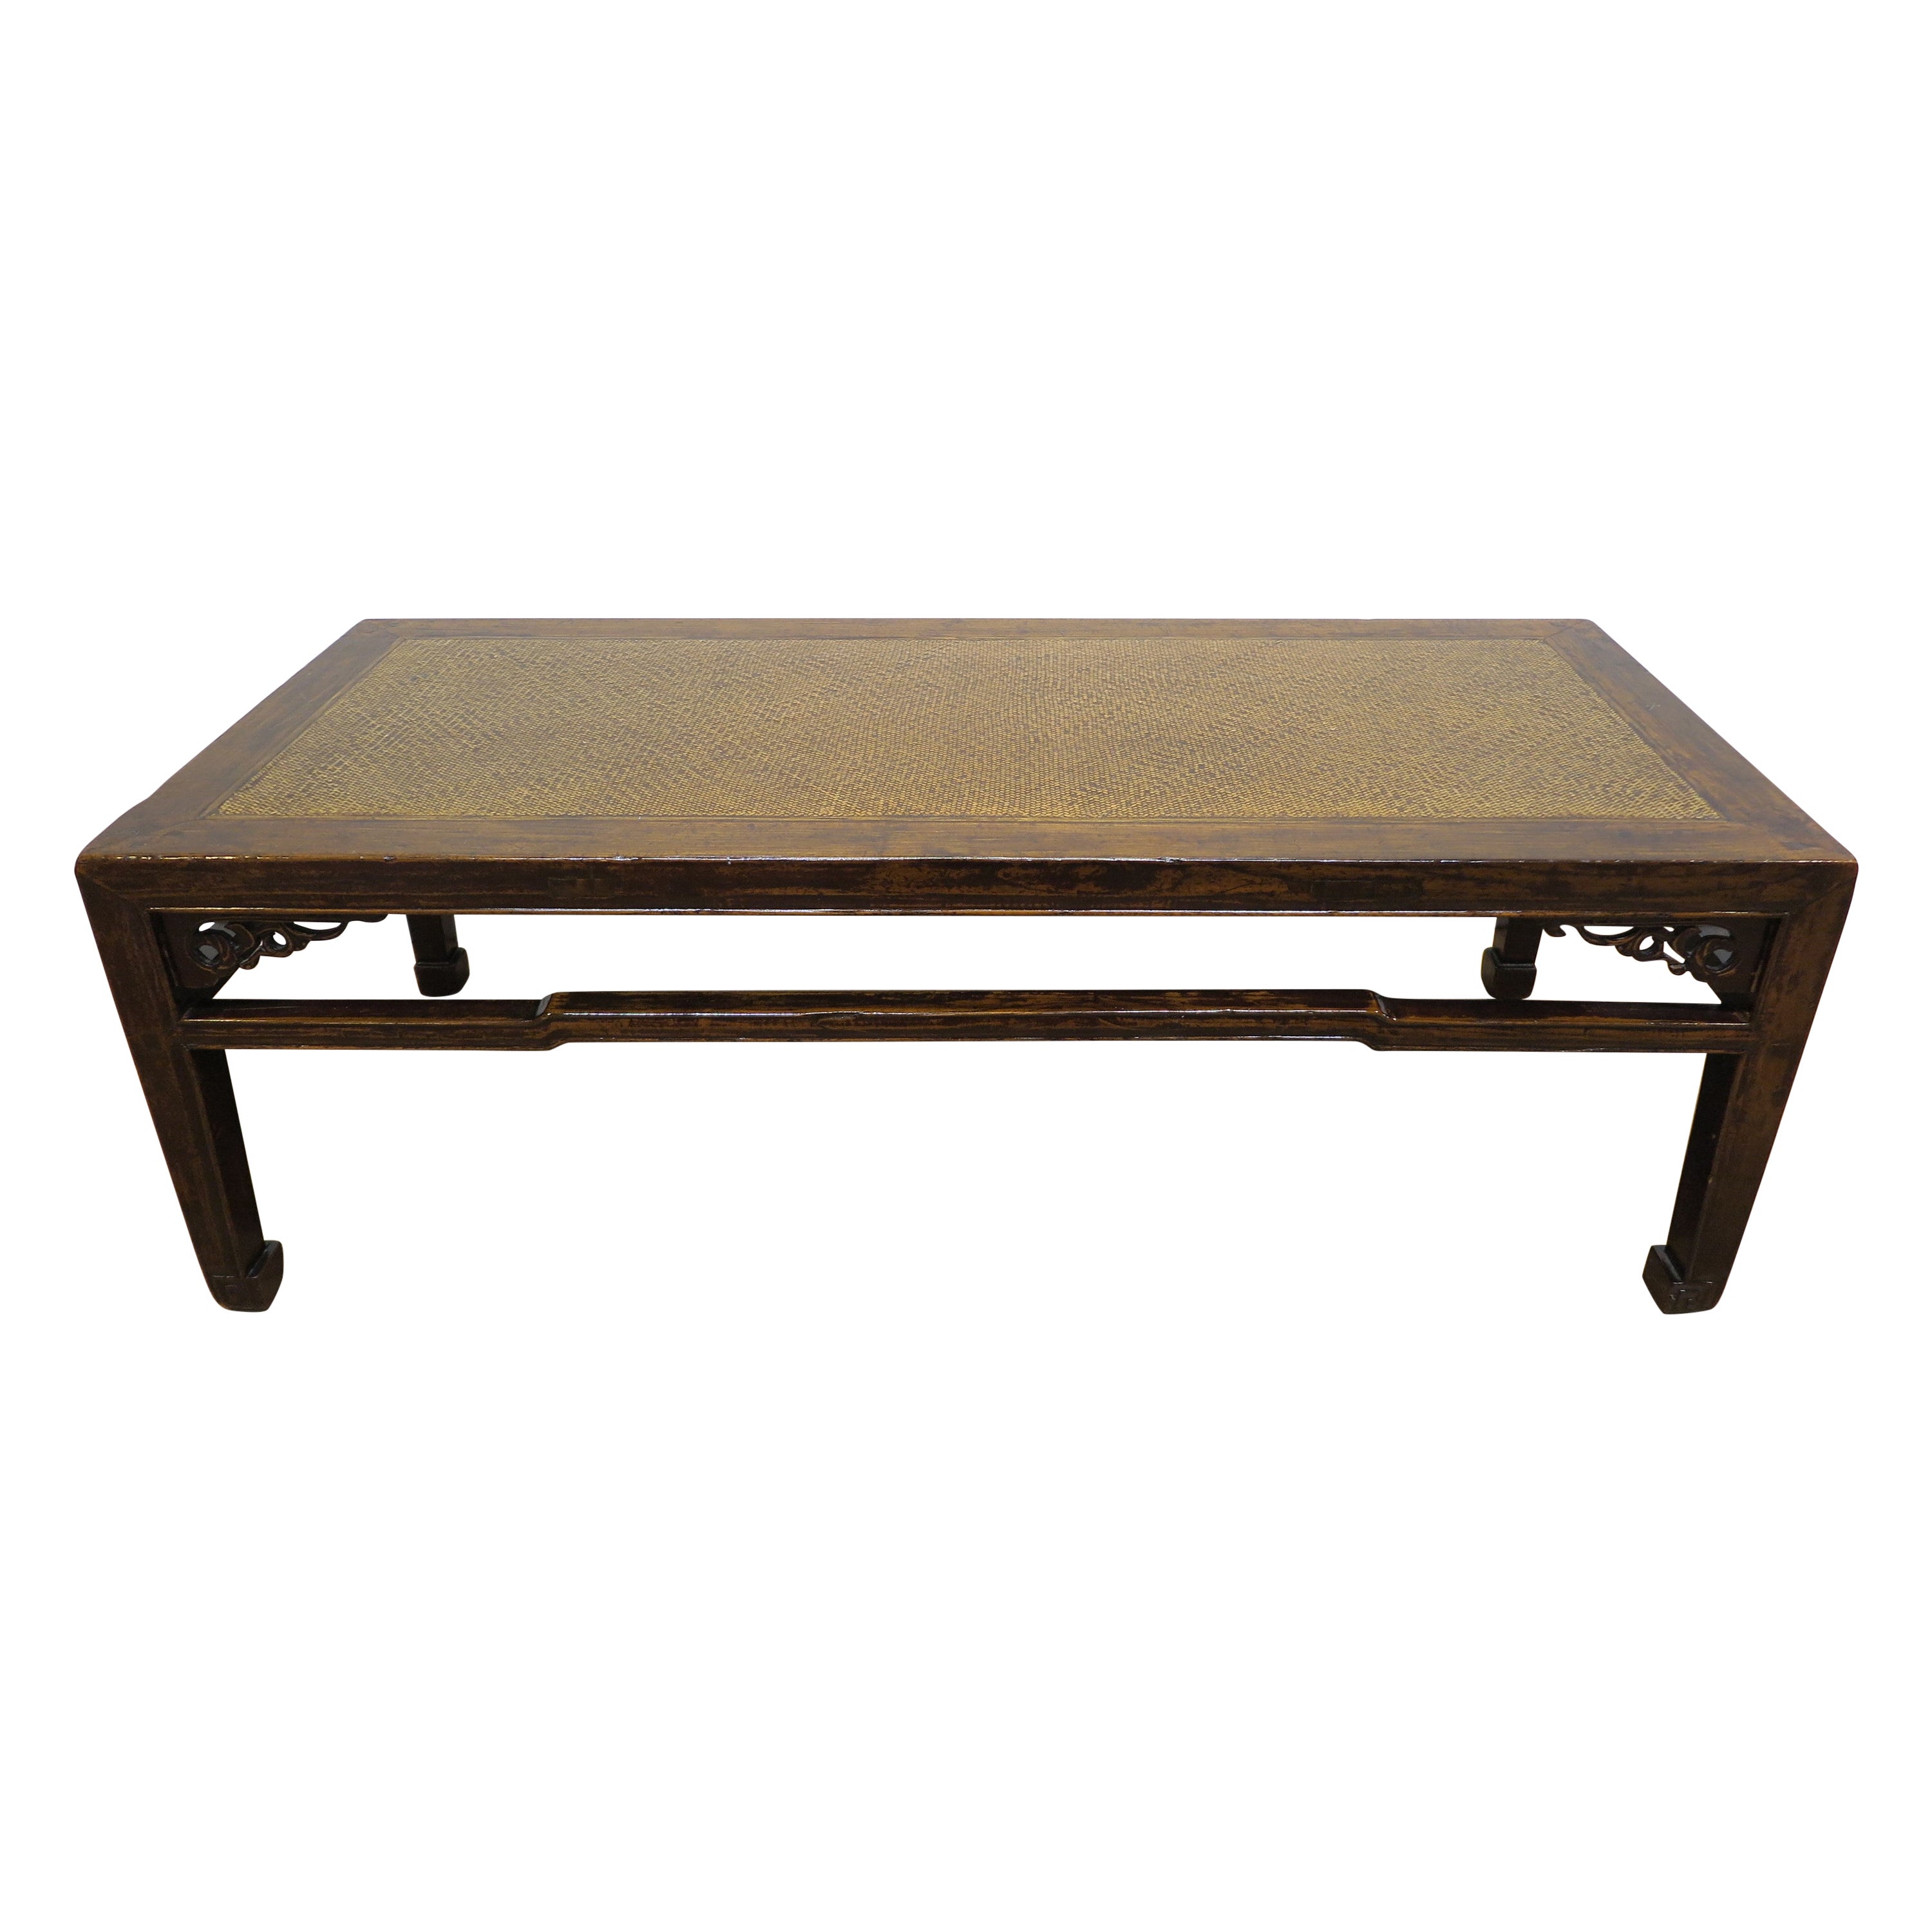 19th Century Chinese Low Table Cocktail Coffee Table 